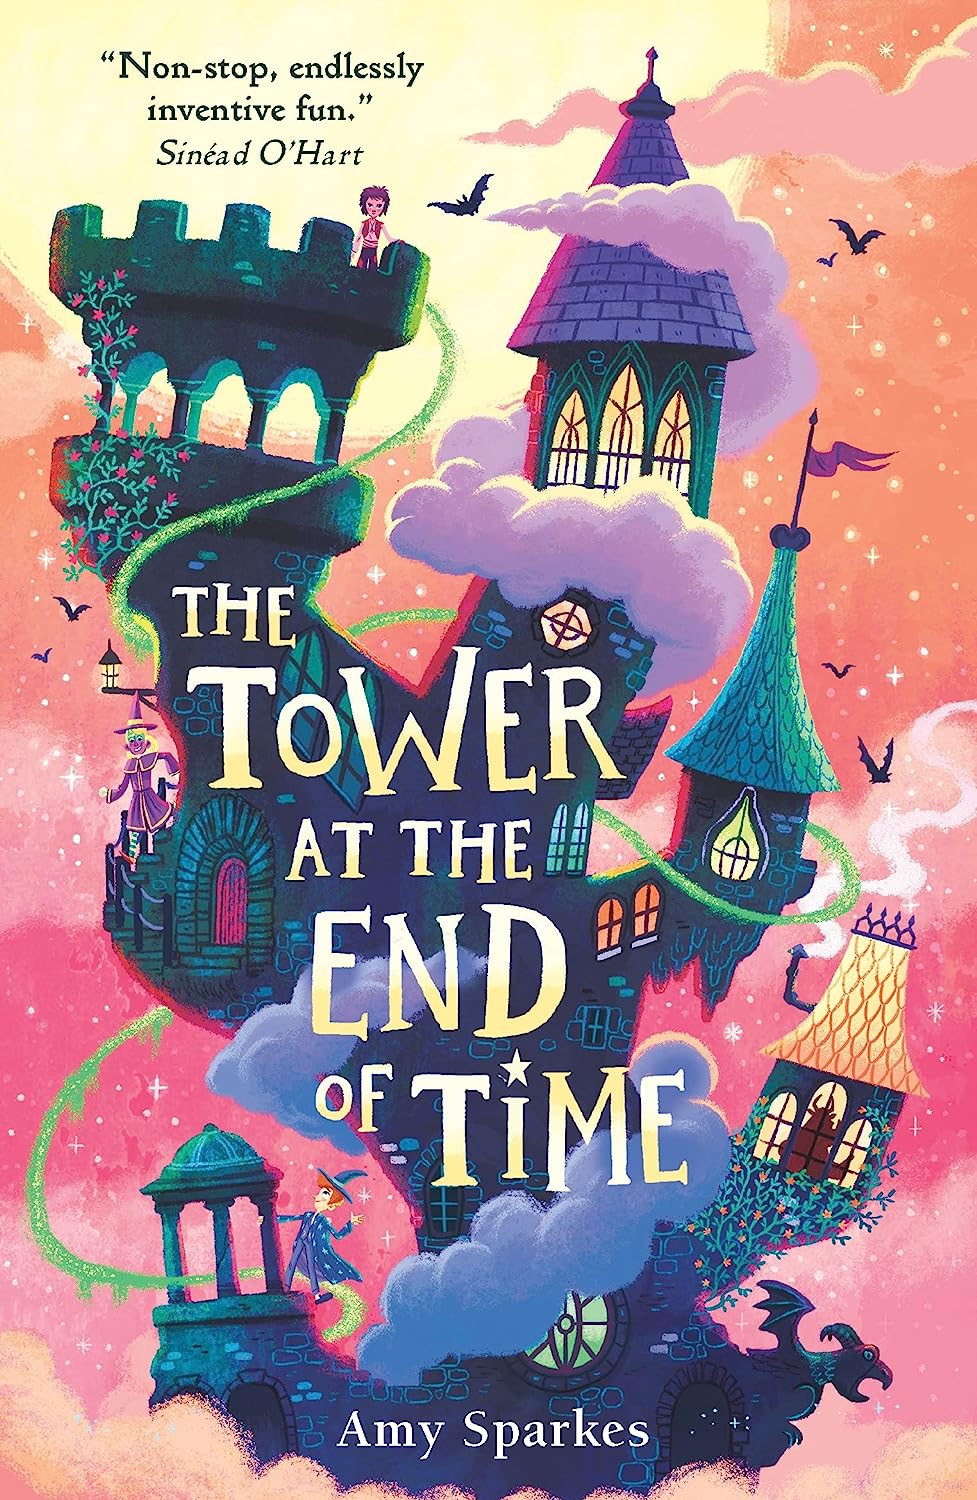 Amy Sparkes, Ben Mantle: The Tower at the End of Time (Paperback, 2022, Walker Books)